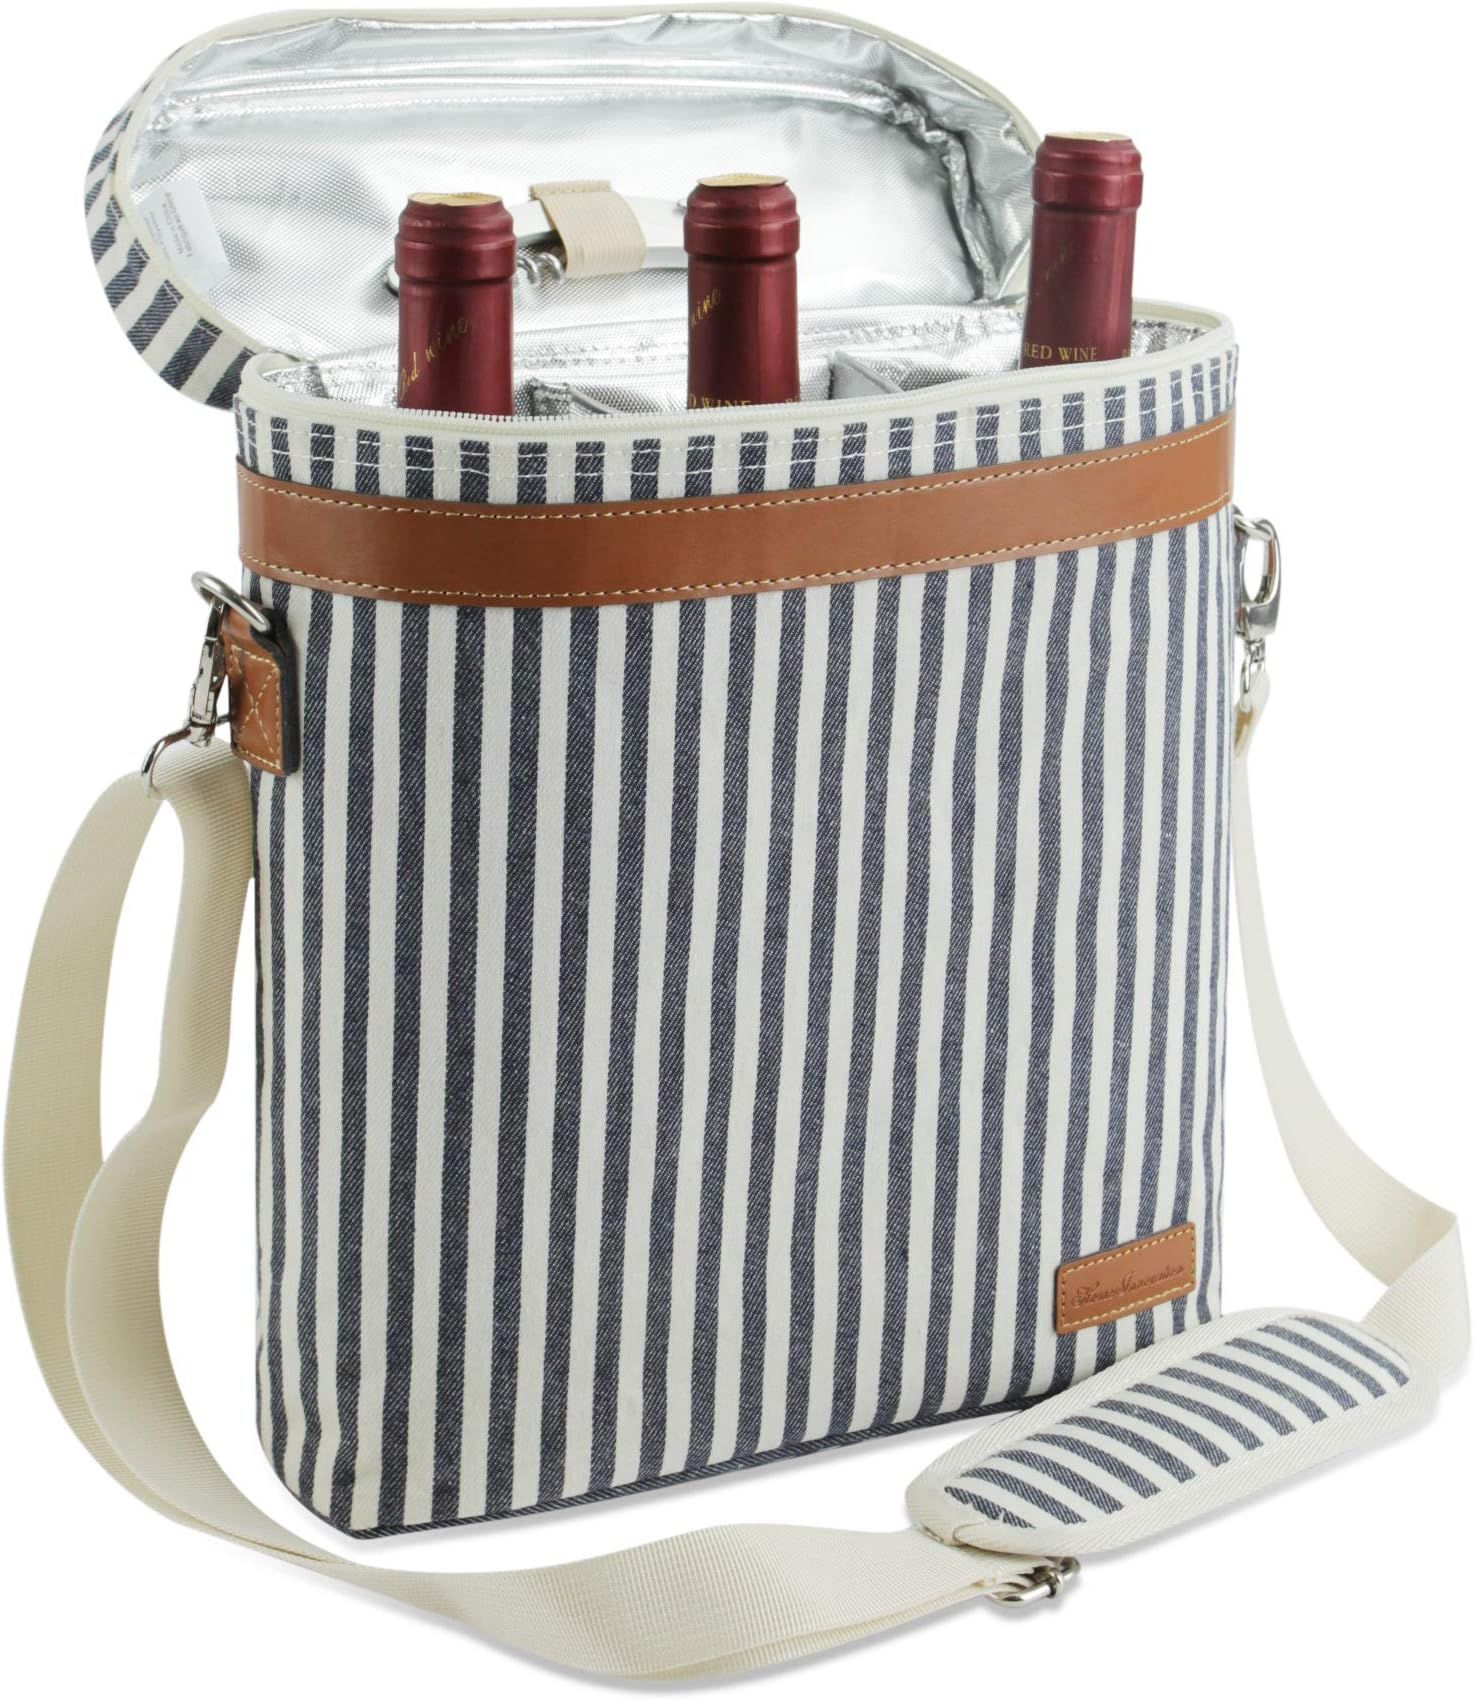 ZORMY 3 Bottle Insulated Wine Tote Cooler Bag, Portable Wine Carrier with Corkscrew Opener and Sh... | Amazon (US)